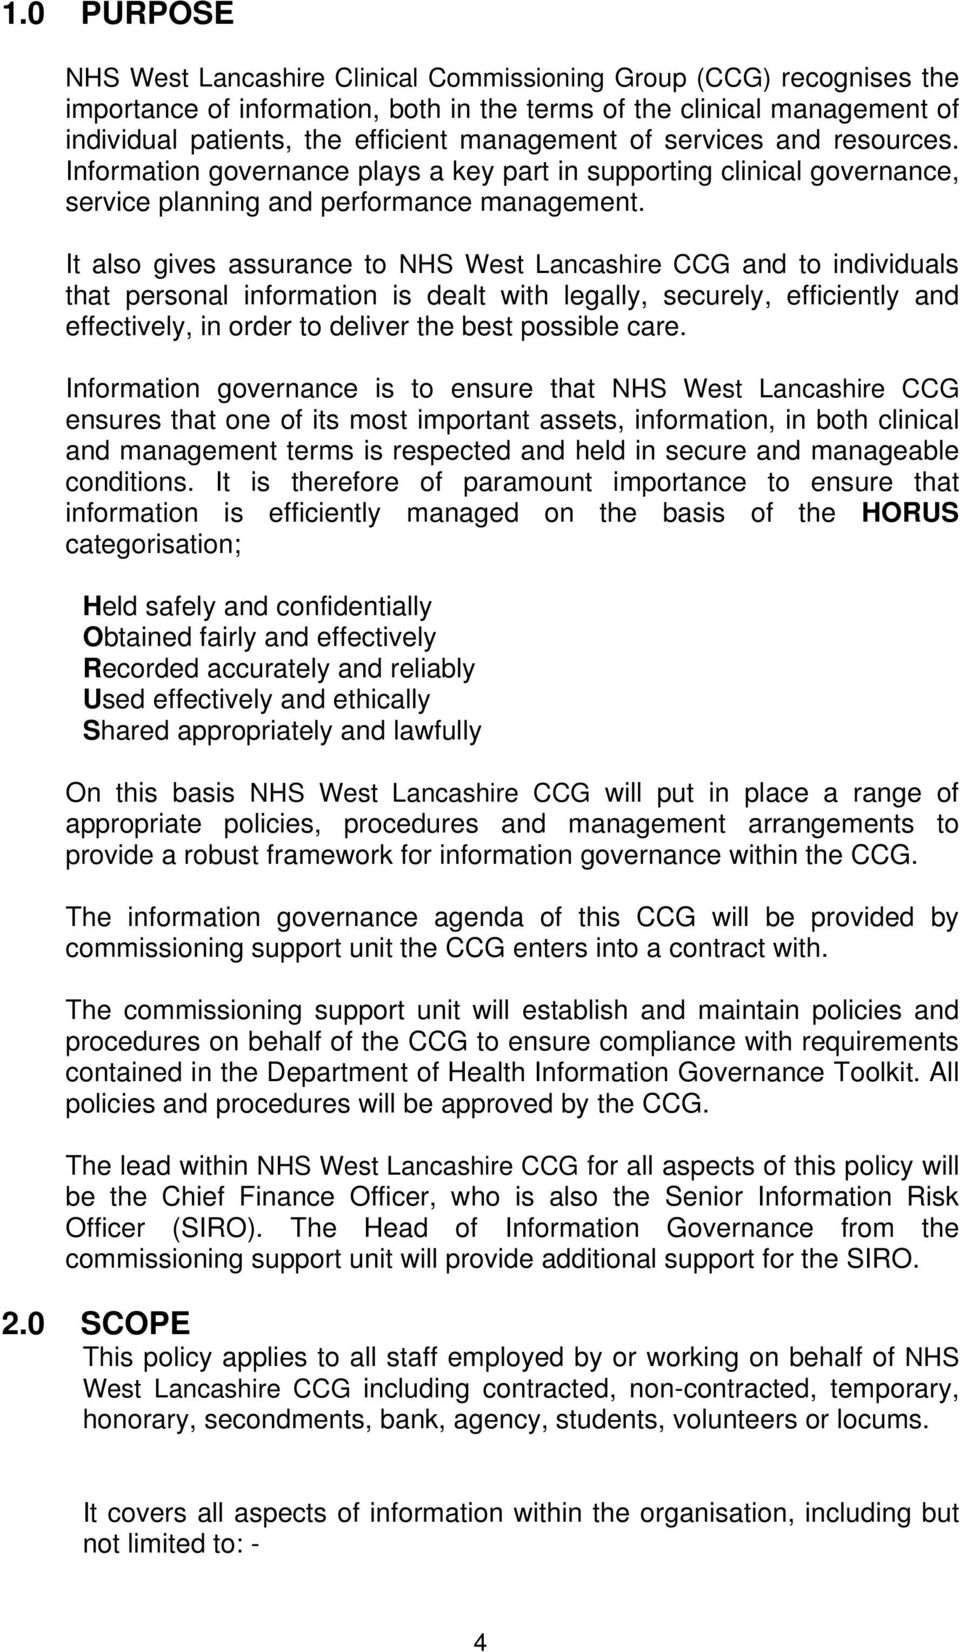 It also gives assurance to NHS West Lancashire CCG and to individuals that personal information is dealt with legally, securely, efficiently and effectively, in order to deliver the best possible